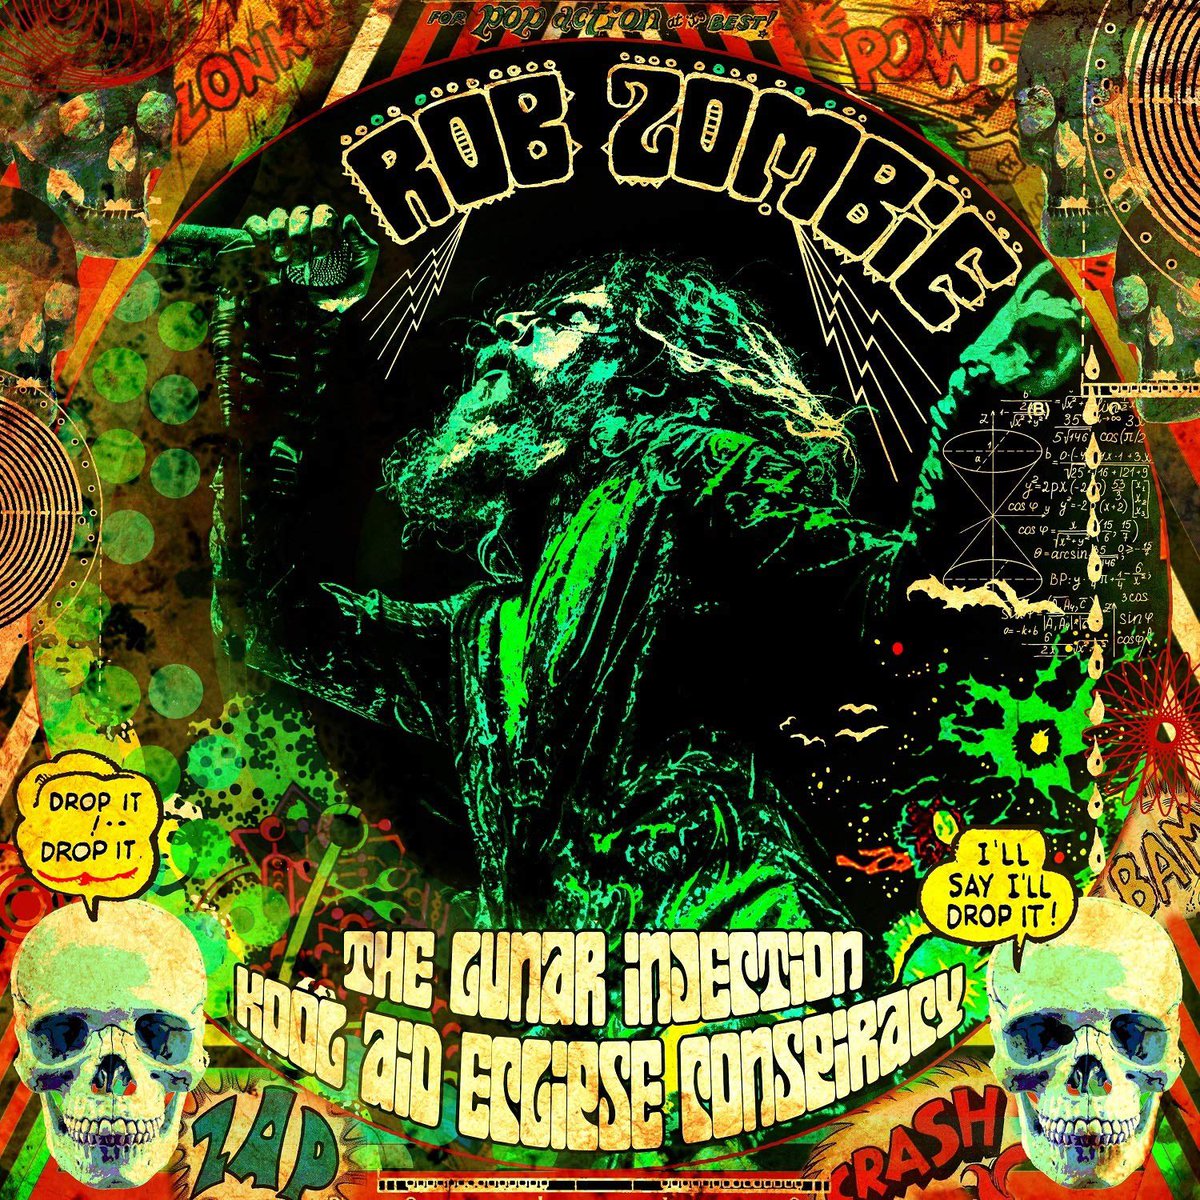 52) Rob Zombie - The Lunar Injection Kool Aid Eclipse Conspiracy (2021, album)basically white zombie minus the memorable grooves, edge and grime but FAR more homogeneity. it's dirty but also way too cleanly produced if you catch my drift, just a pointless waste of time4/10